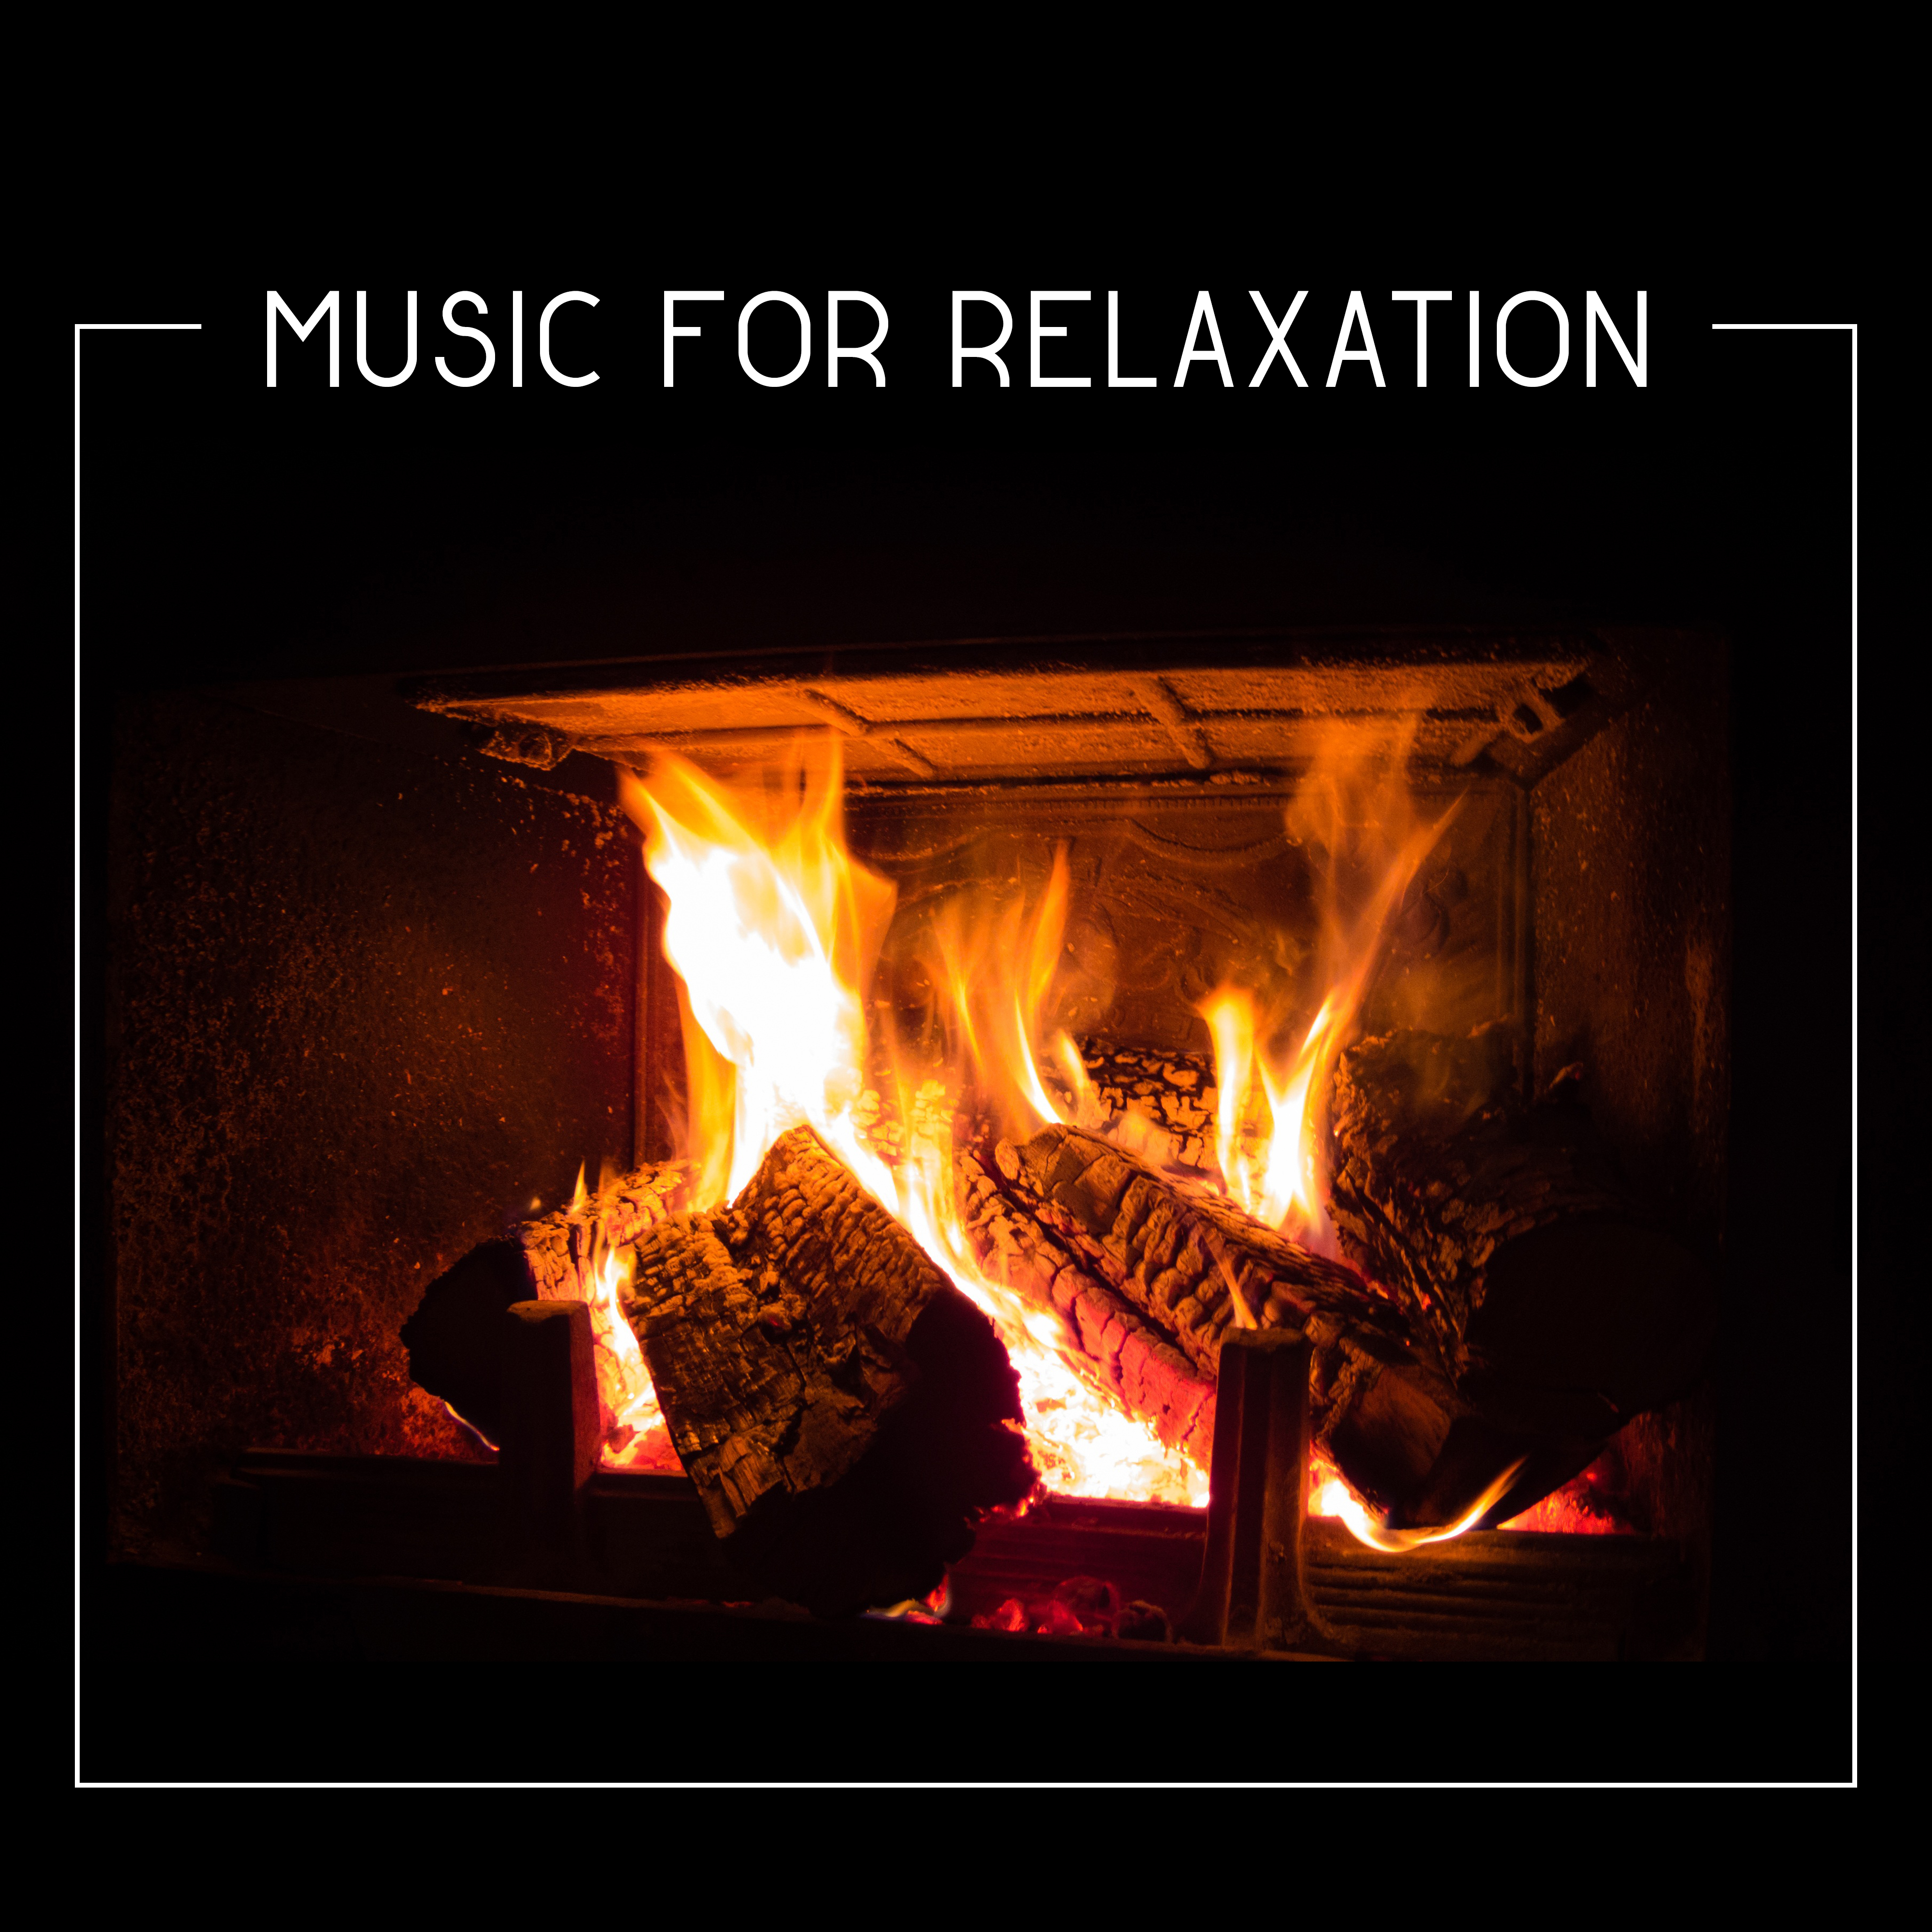 Music for Relaxation – Deep Sleep, Instrumental Sounds to Rest, Calming Songs, Classical Music, Bach, Mozart, Beethoven